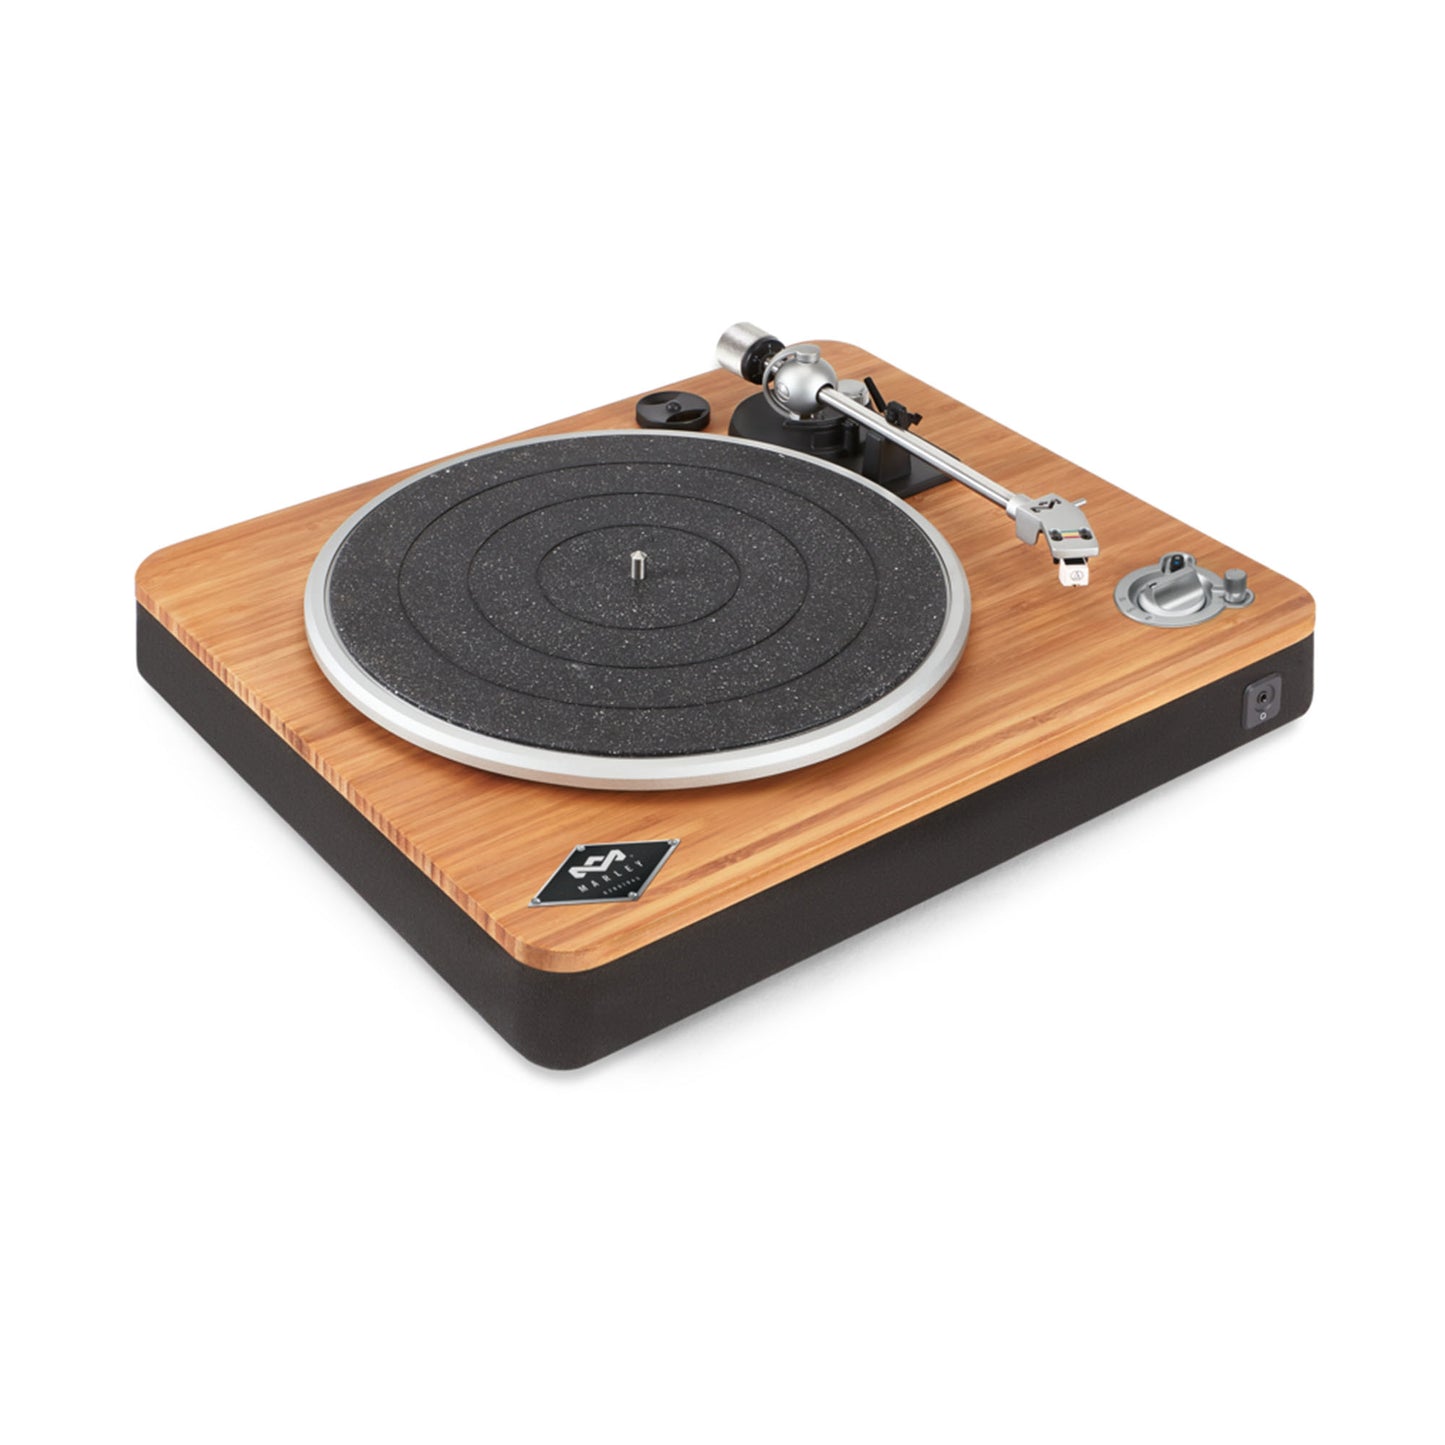 House of Marley Black Stir It Up Wireless Turntable - 15-04420